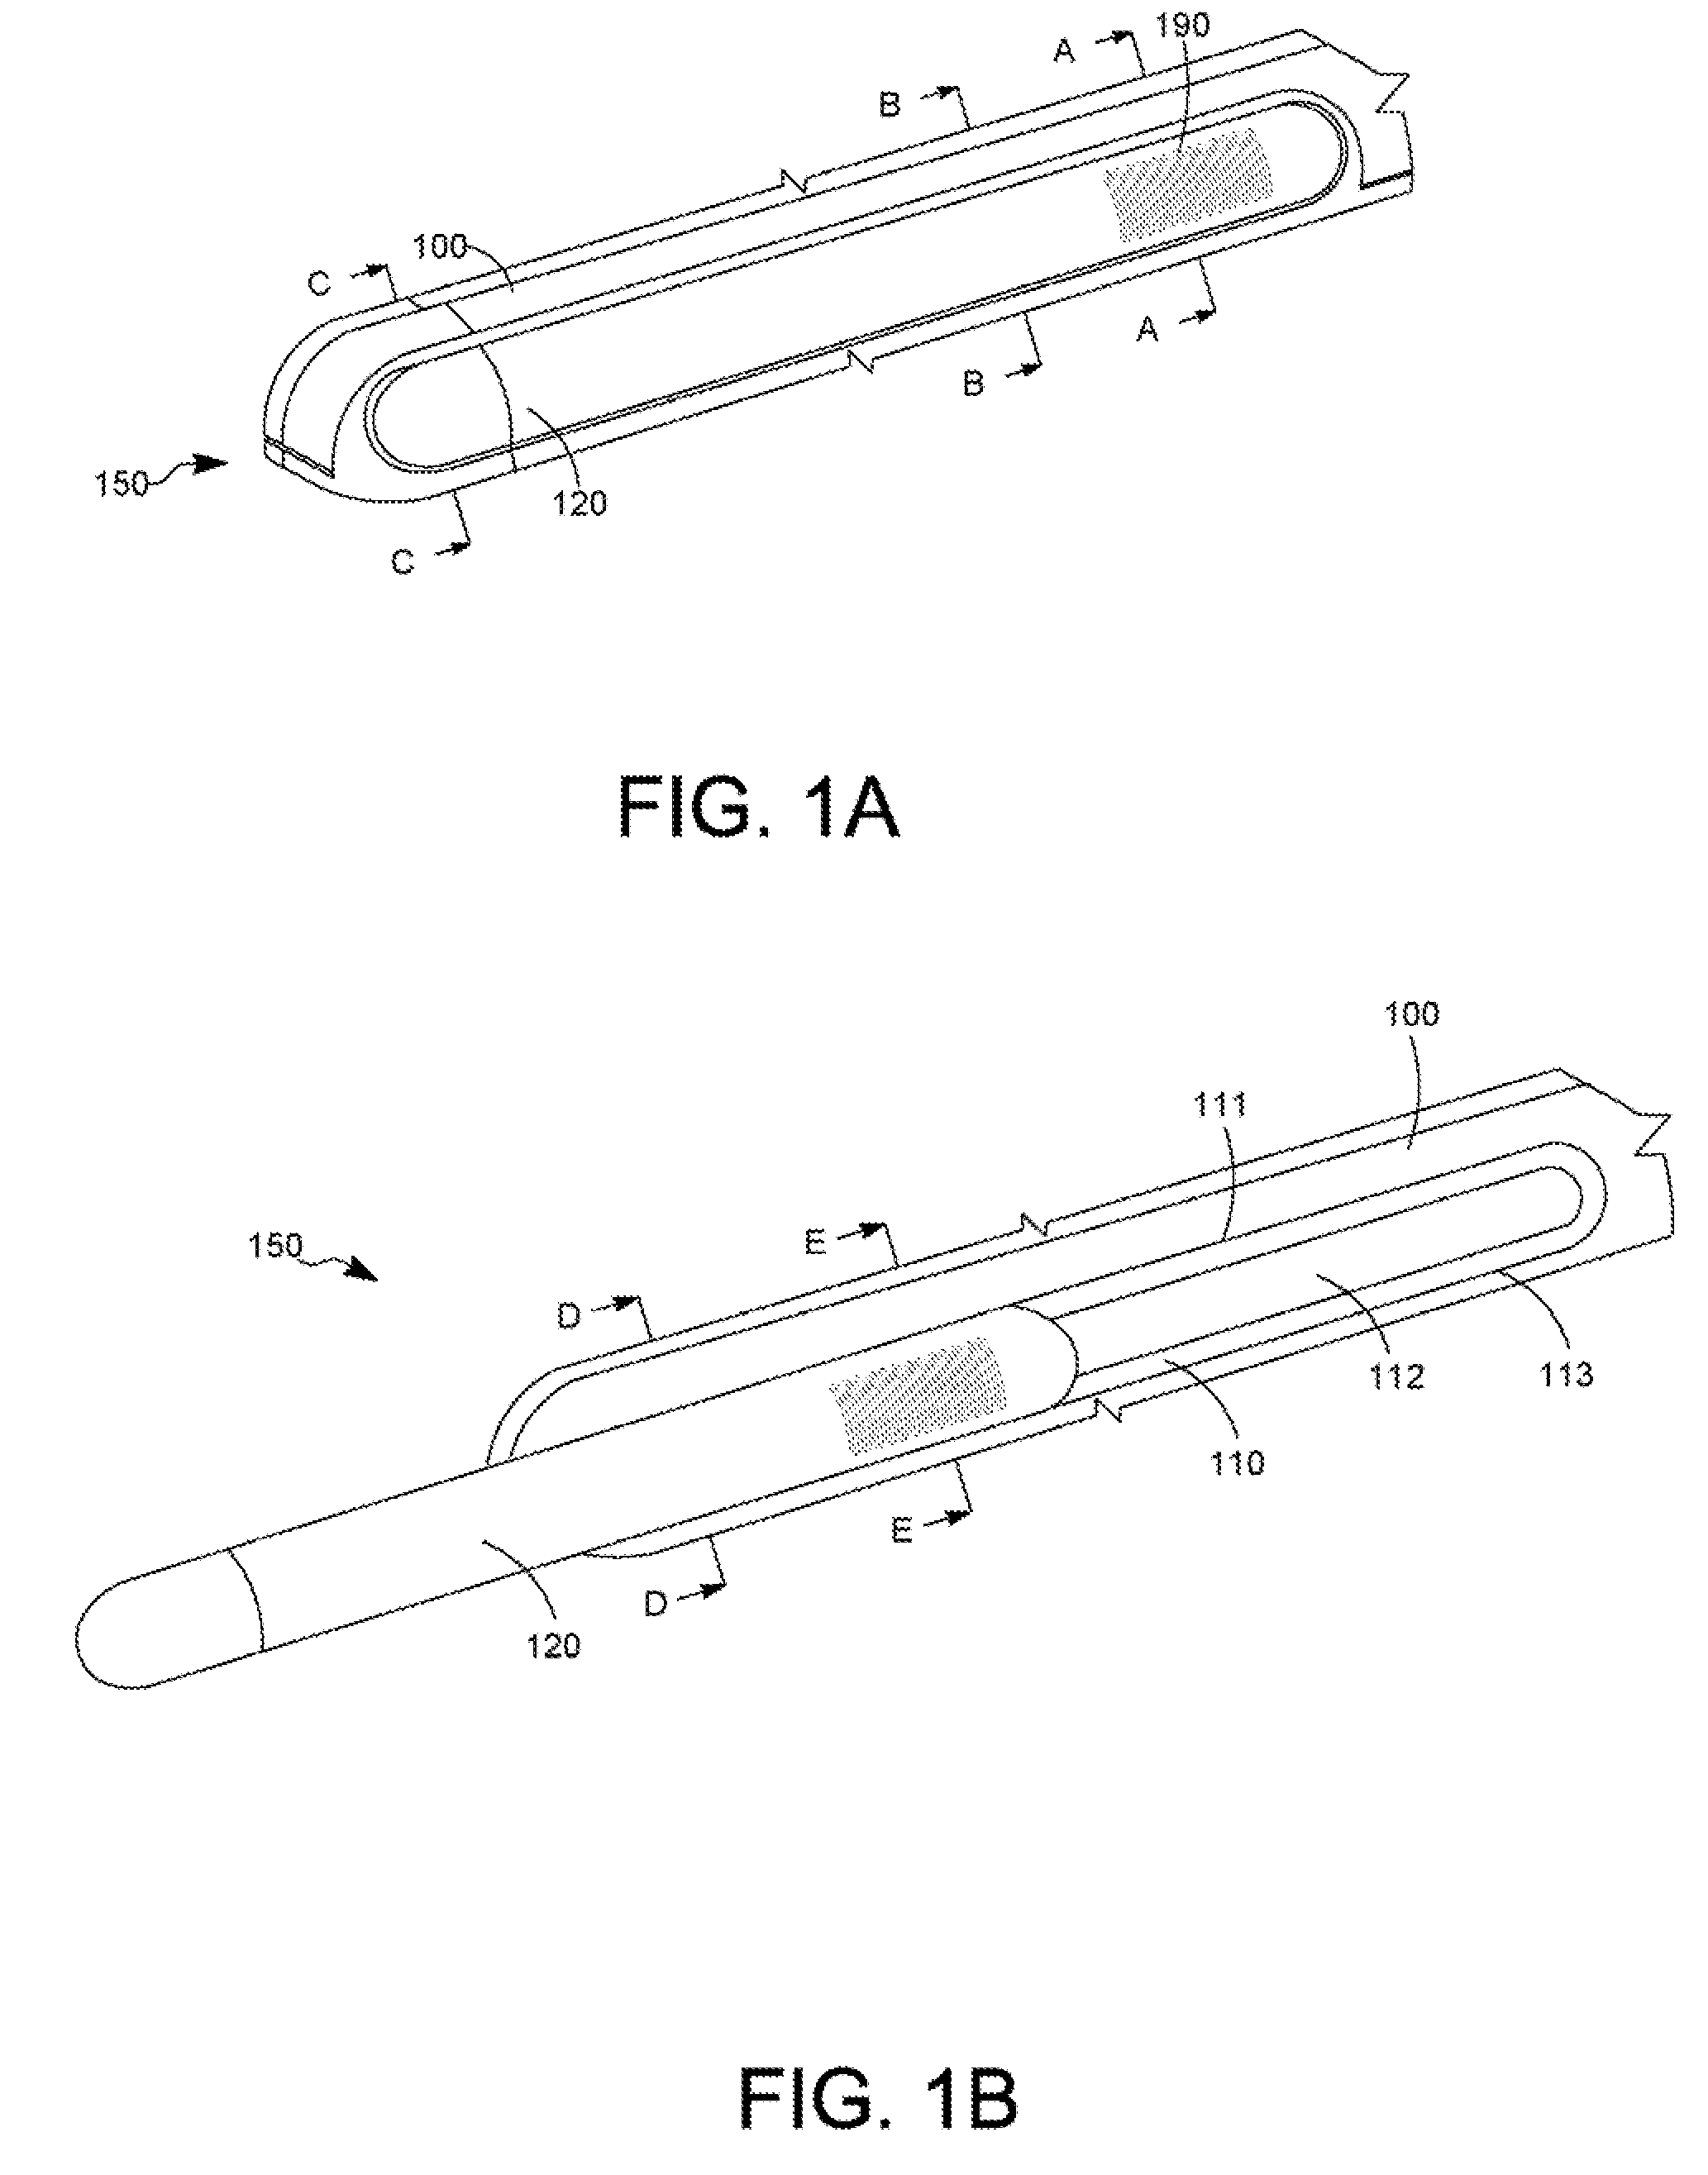 Antenna-carrying assembly